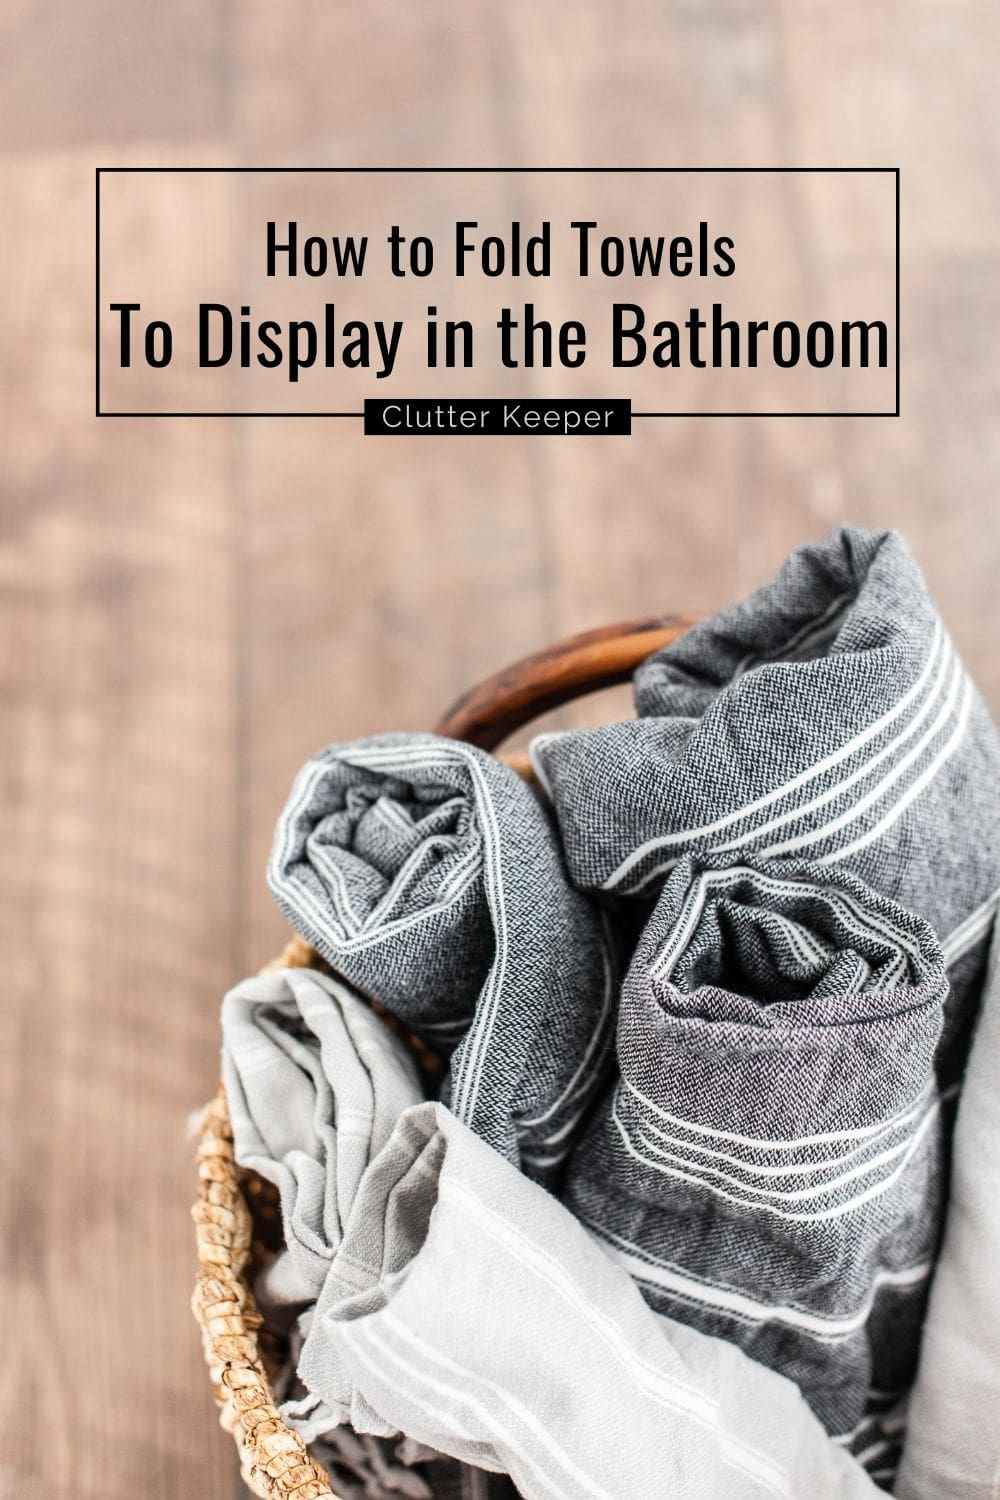 How to fold towels to display in the bathroom.